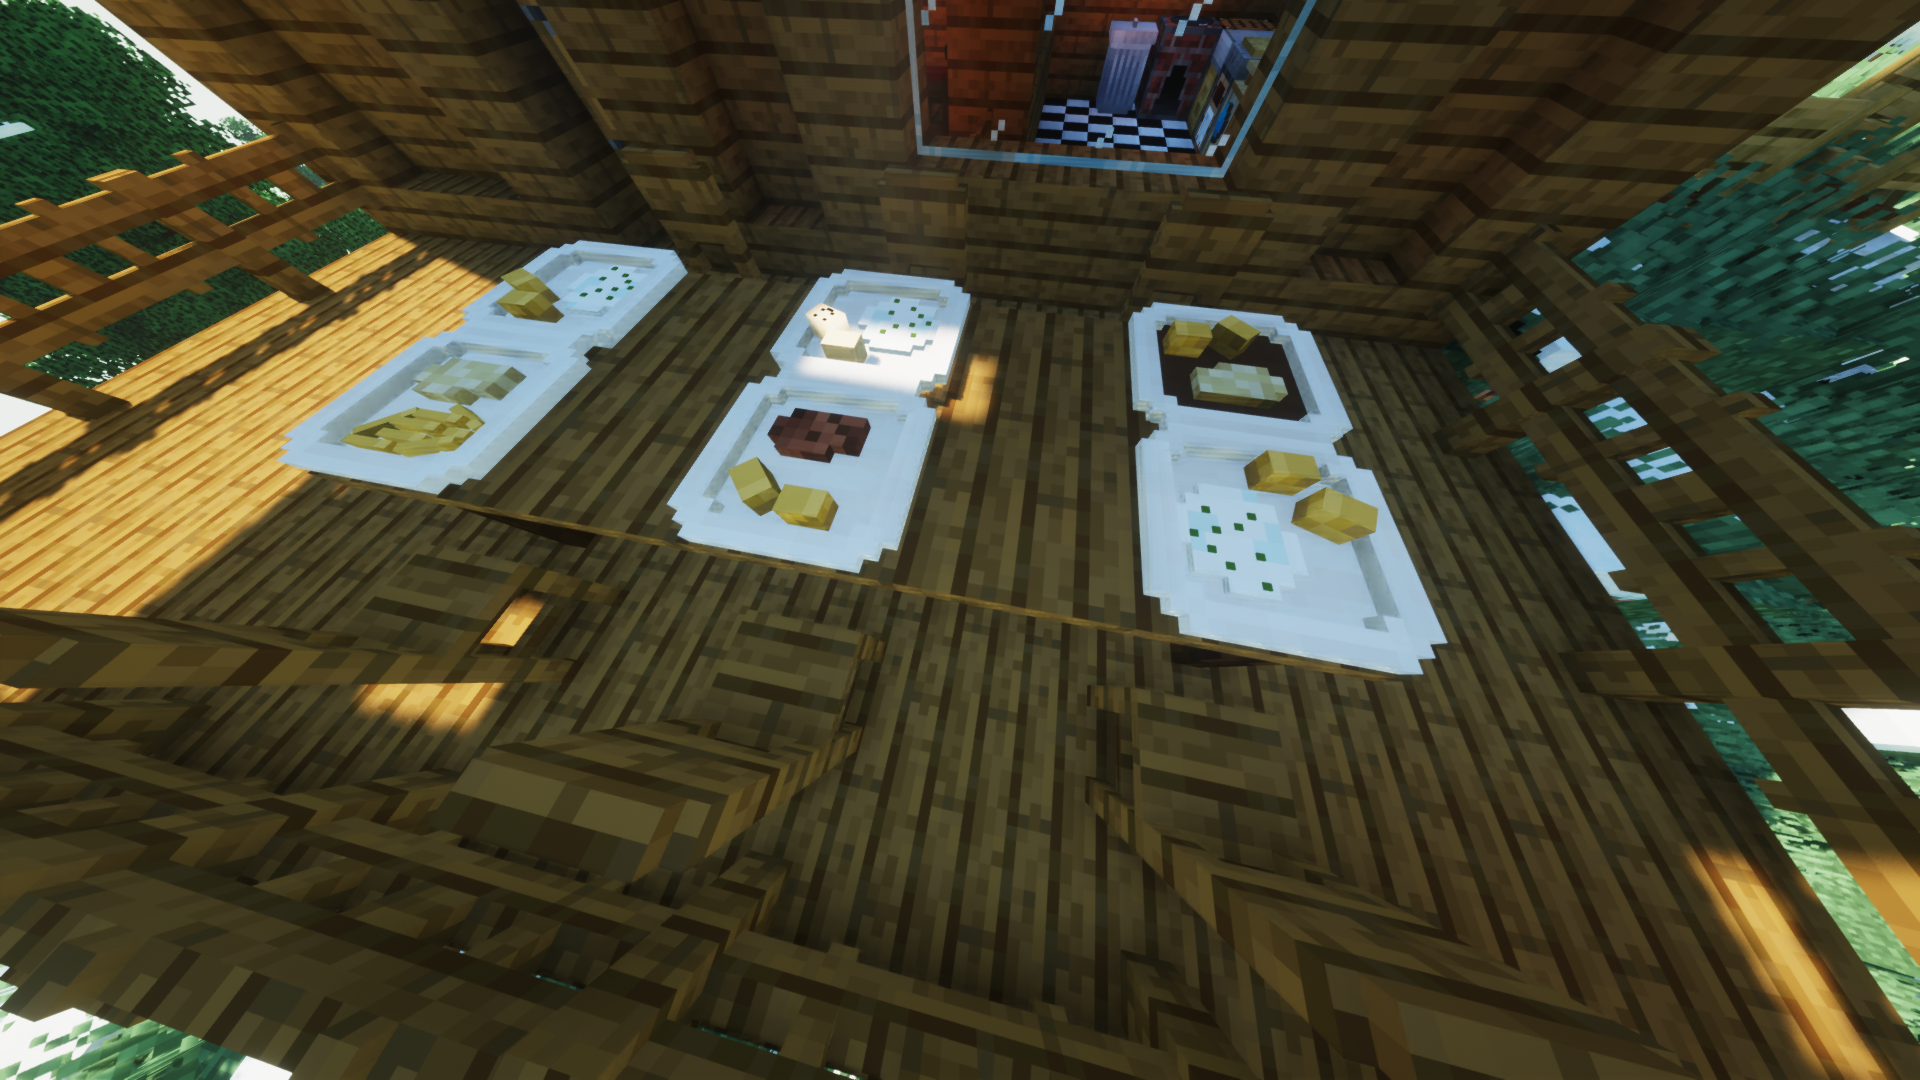 Some of the new dishes the mod adds